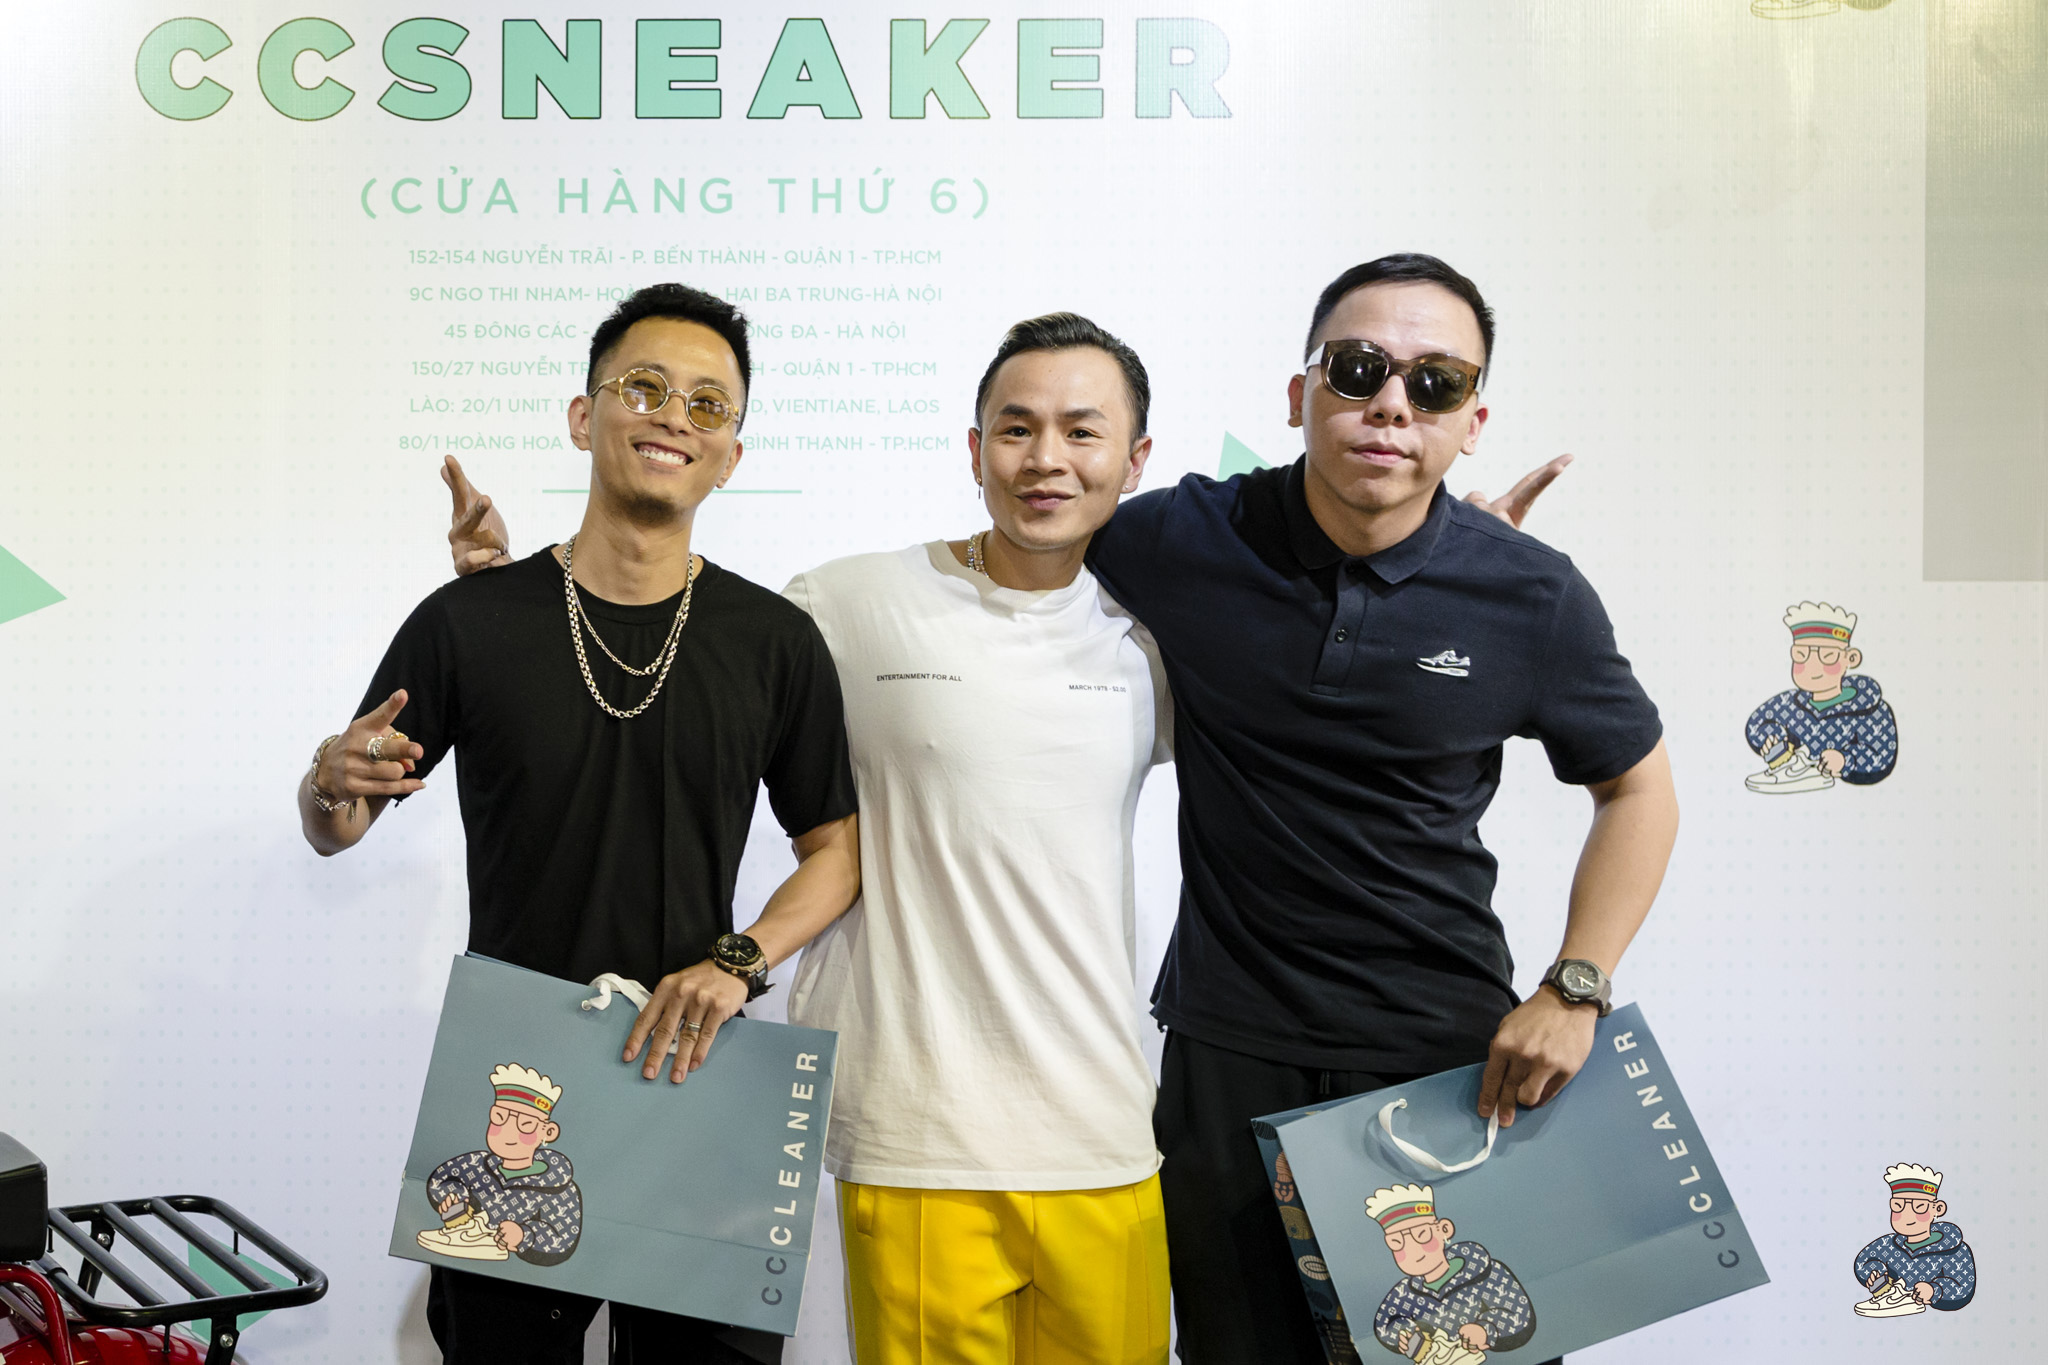 Keeping his promise, Binz personally drew and signed on his shoes for fans at the opening of CC Sneaker